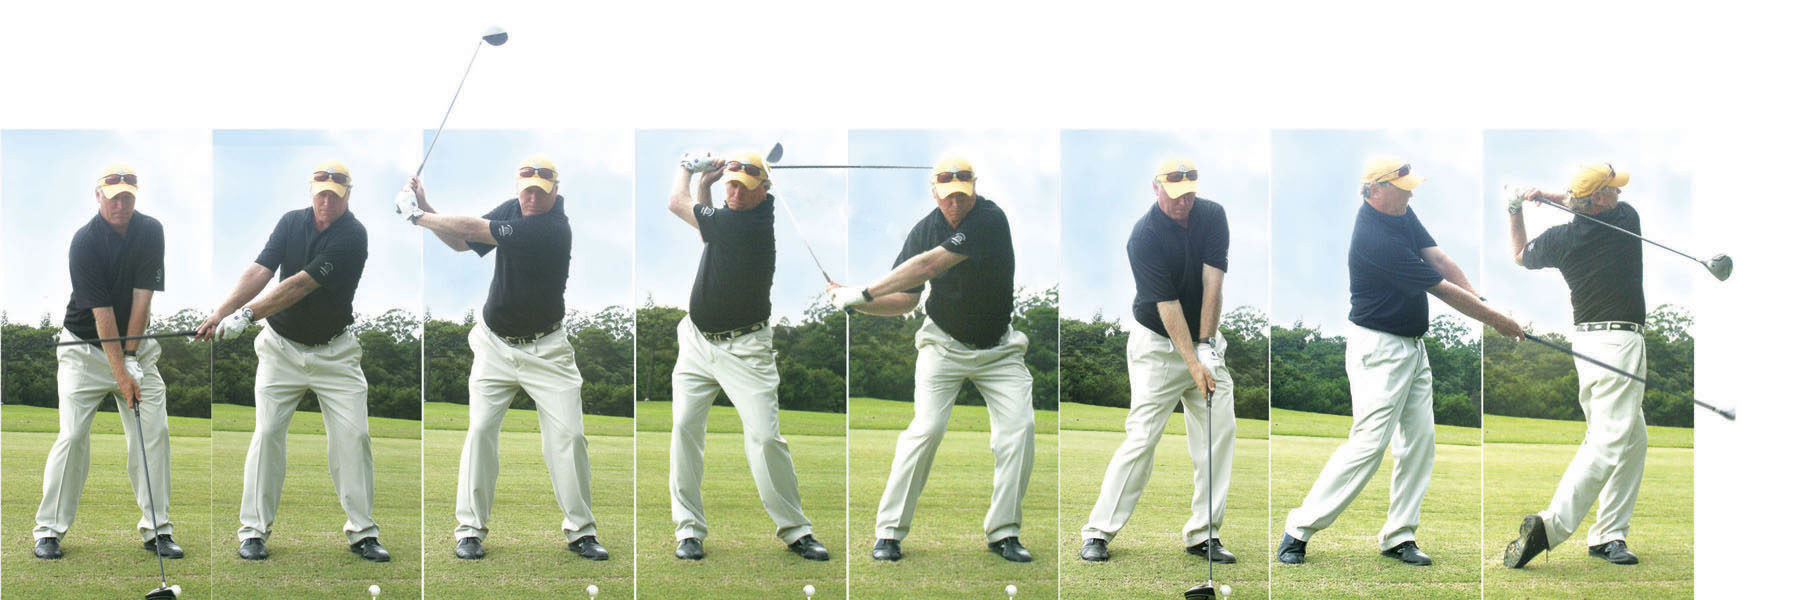 swing sequence